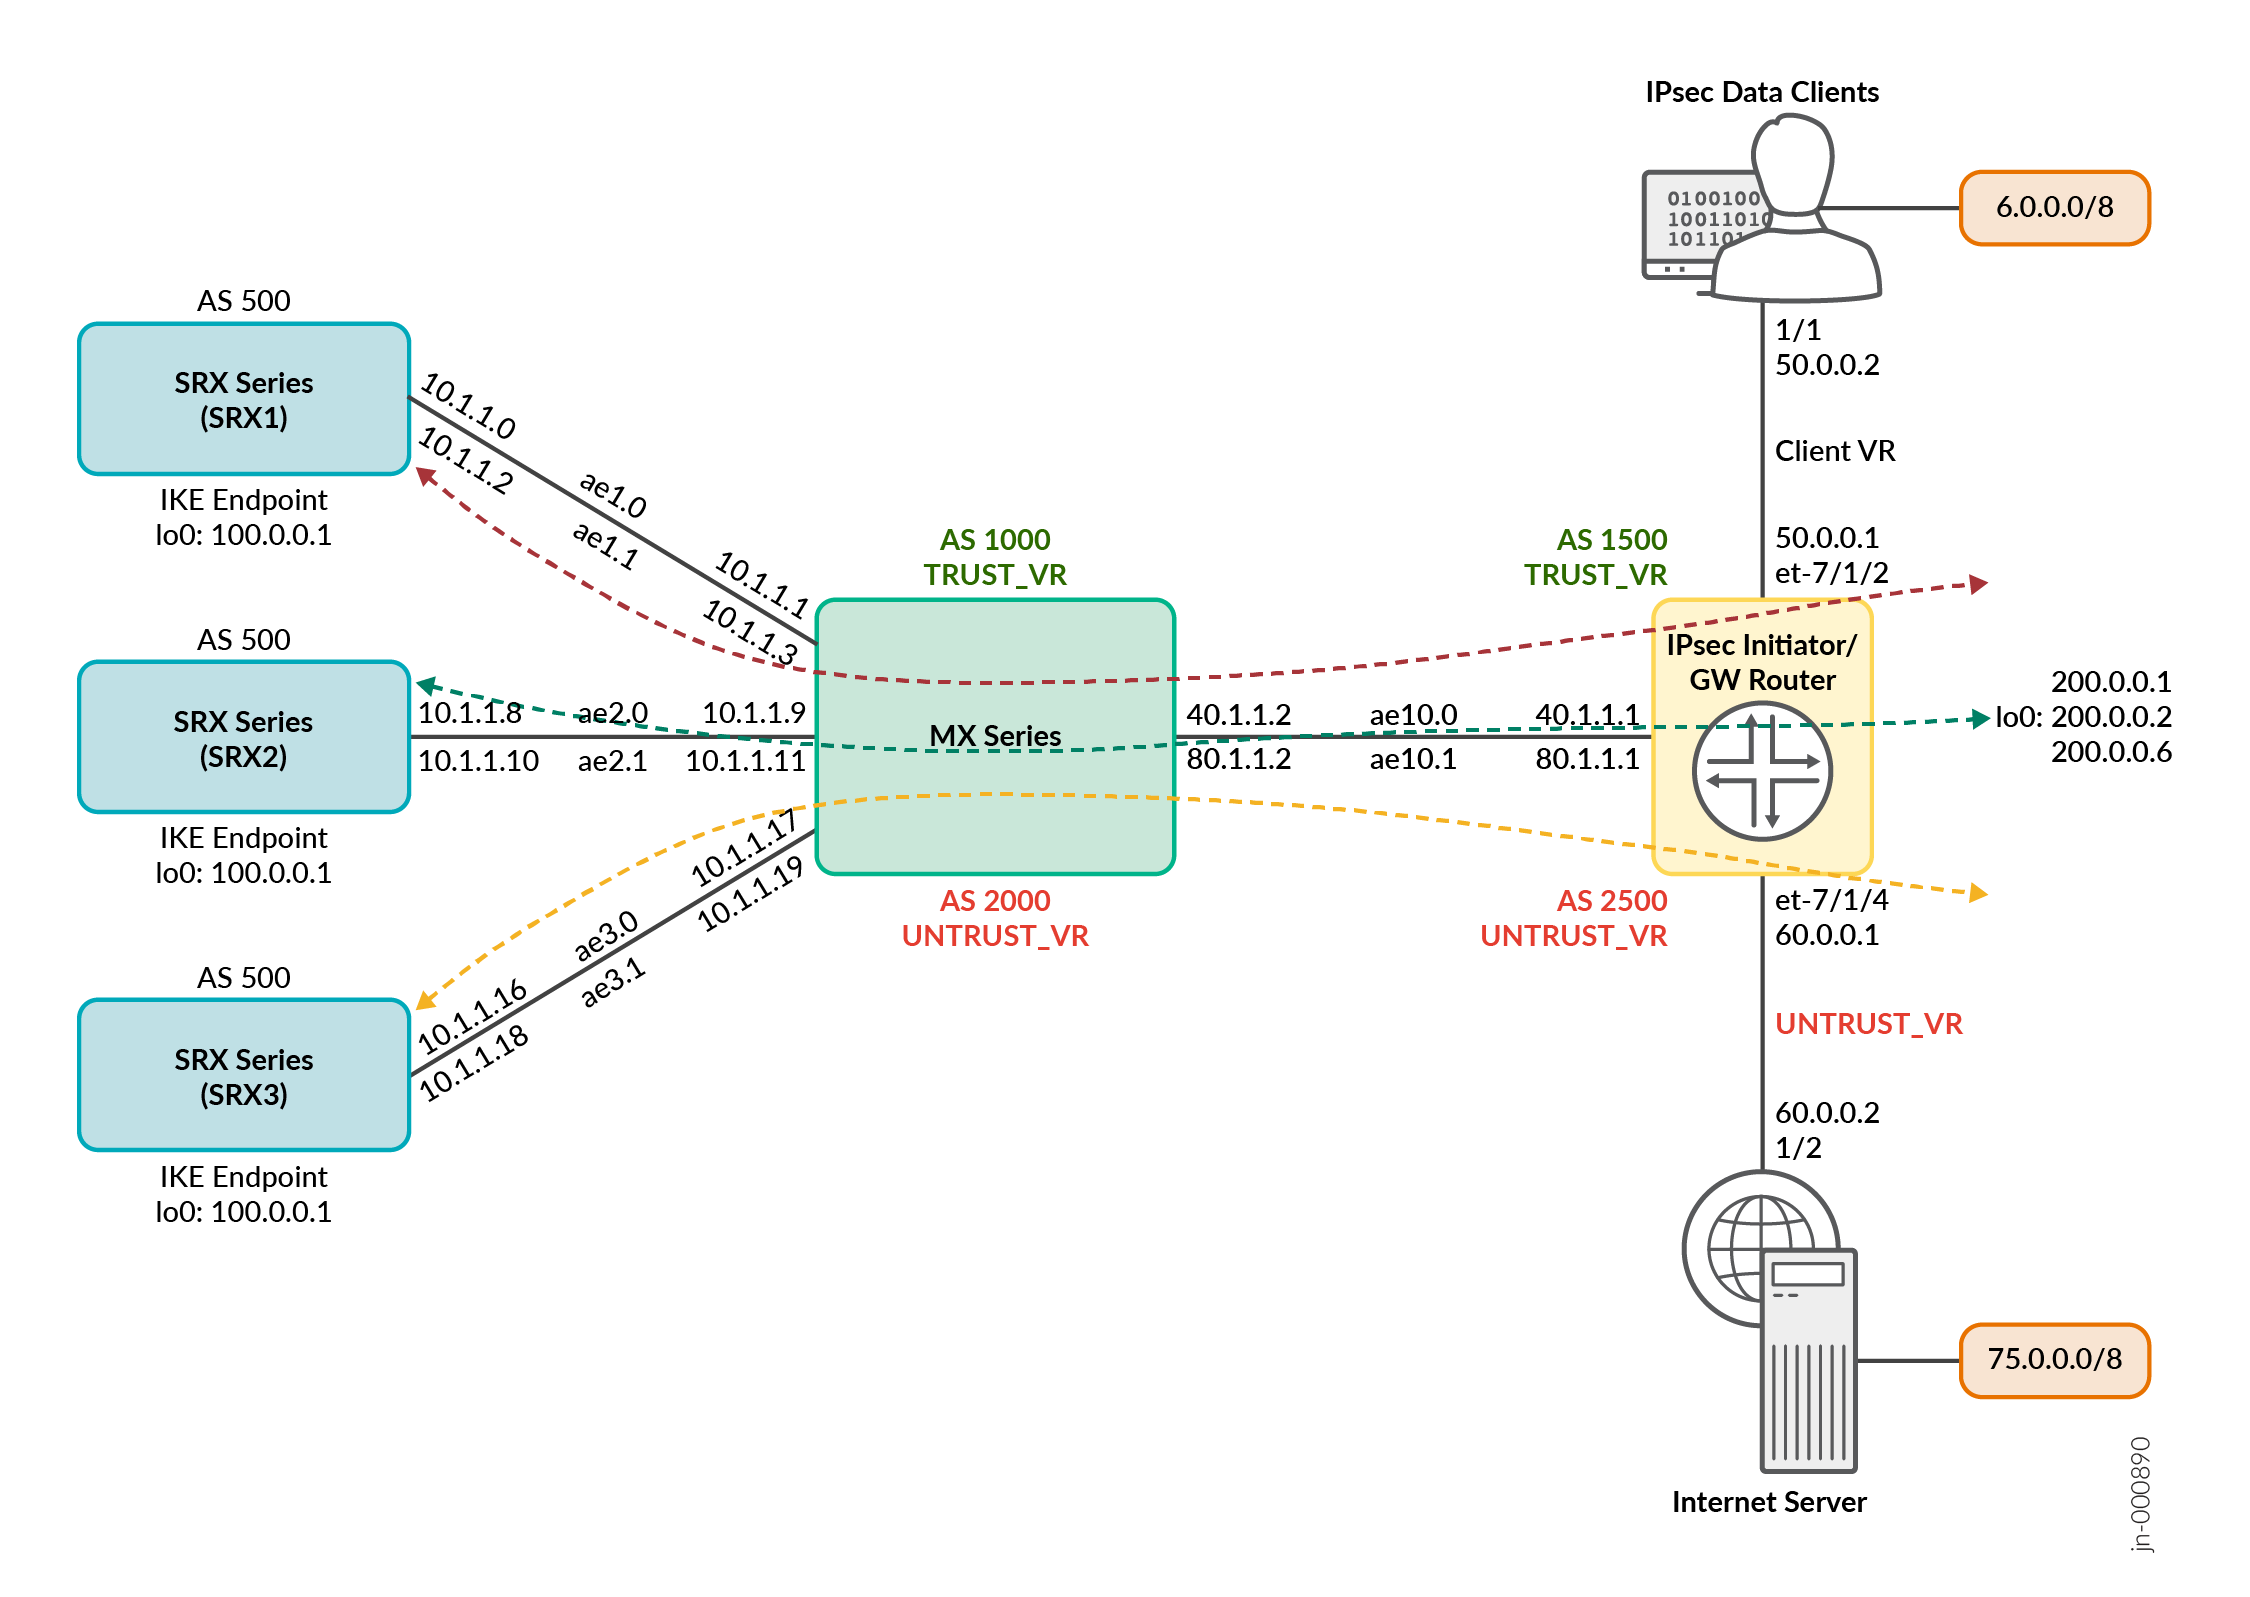 Single MX Series (ECMP based Consistent Hashing) and Scaled-Out SRX Series Firewalls for IPsec VPN Services